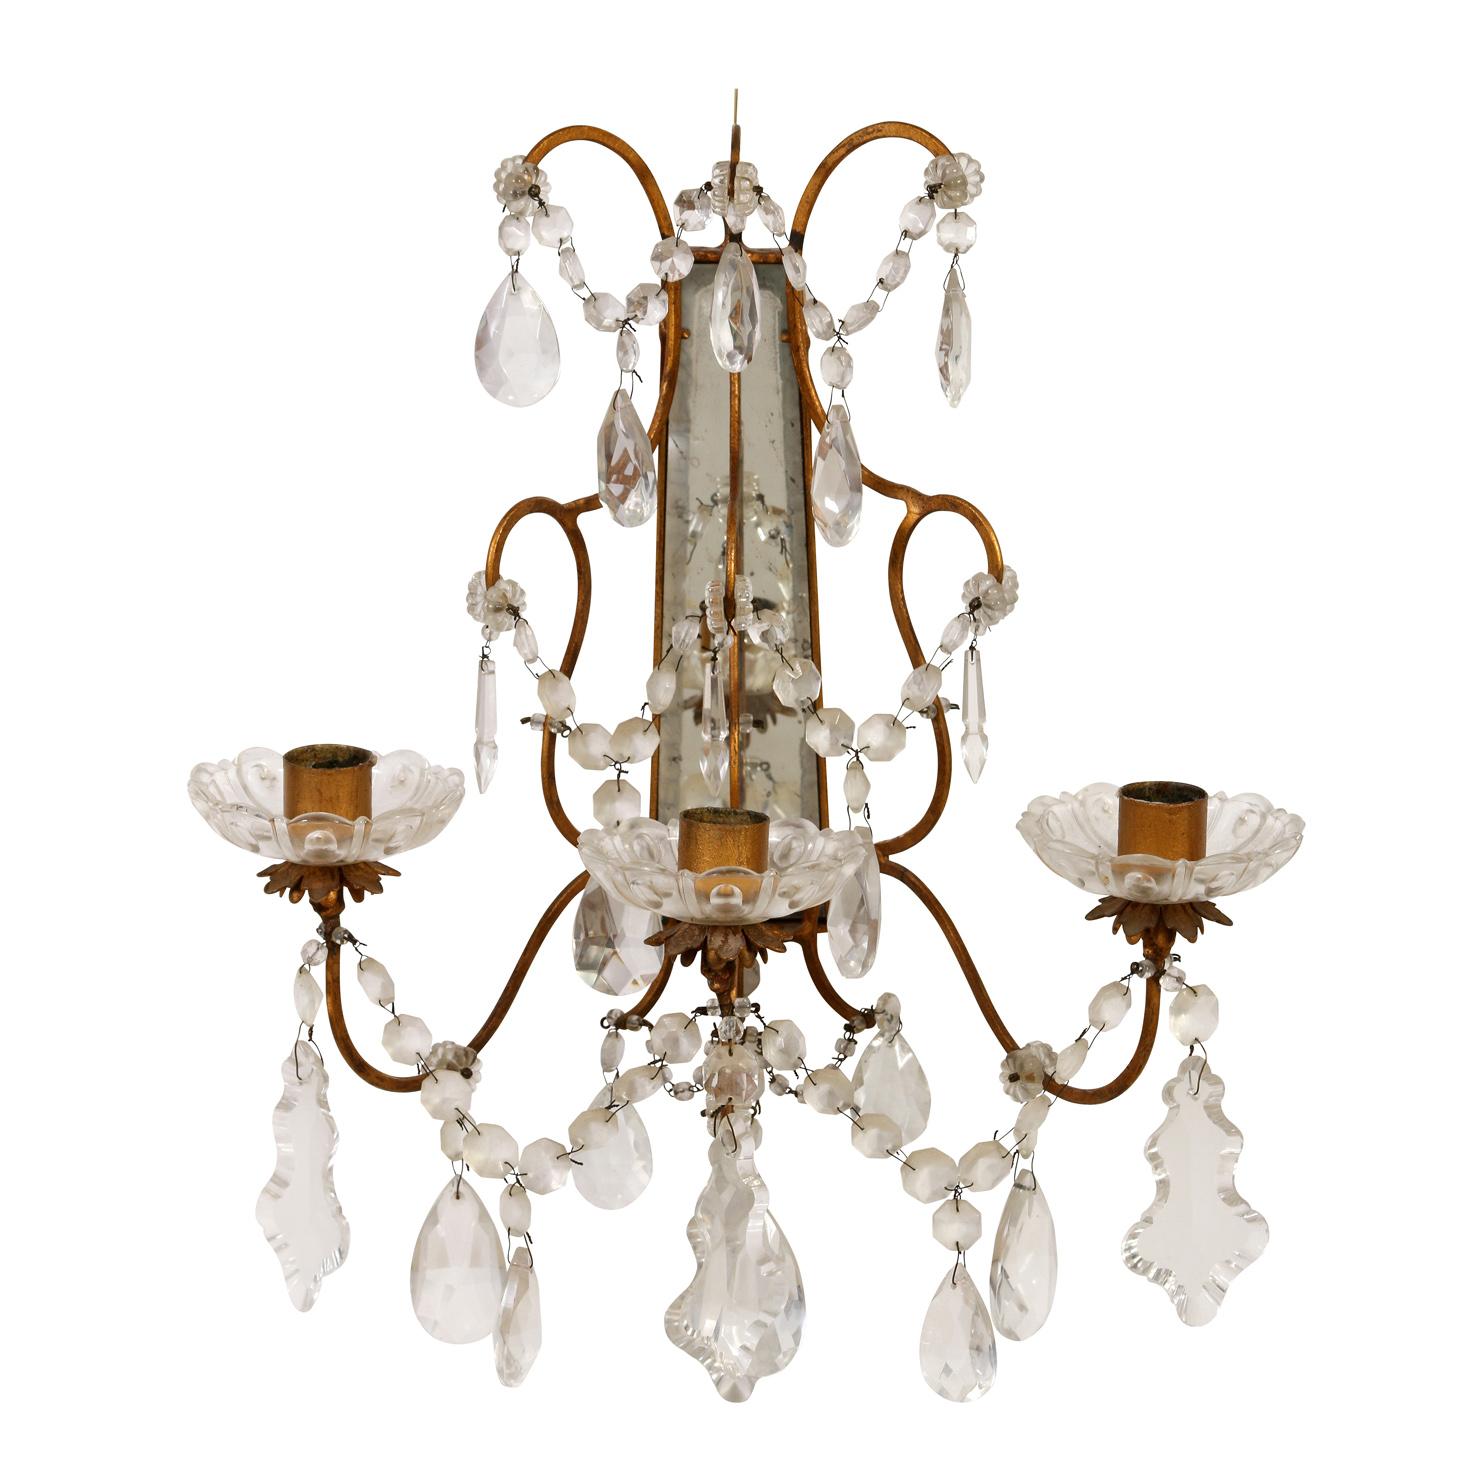 A vintage pair of brass three arm candle sconces with crystal bobeches, swags and drops, and mirror backs.